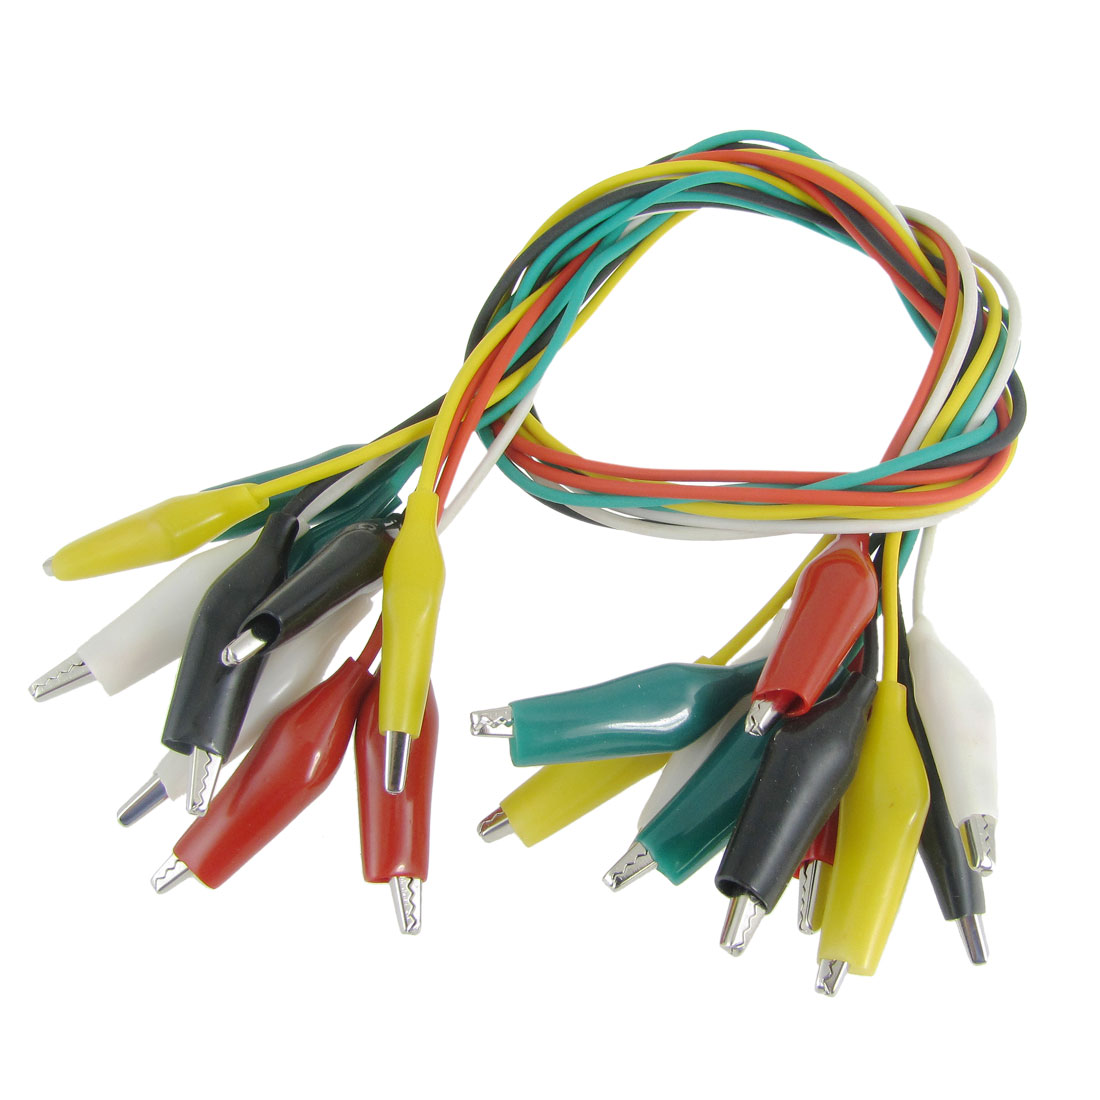 Fluke Networks P4480004 TS52/44/42 Replacement Line Cord with 346A Plug Compatible with 52 and 40 Series Test Sets 